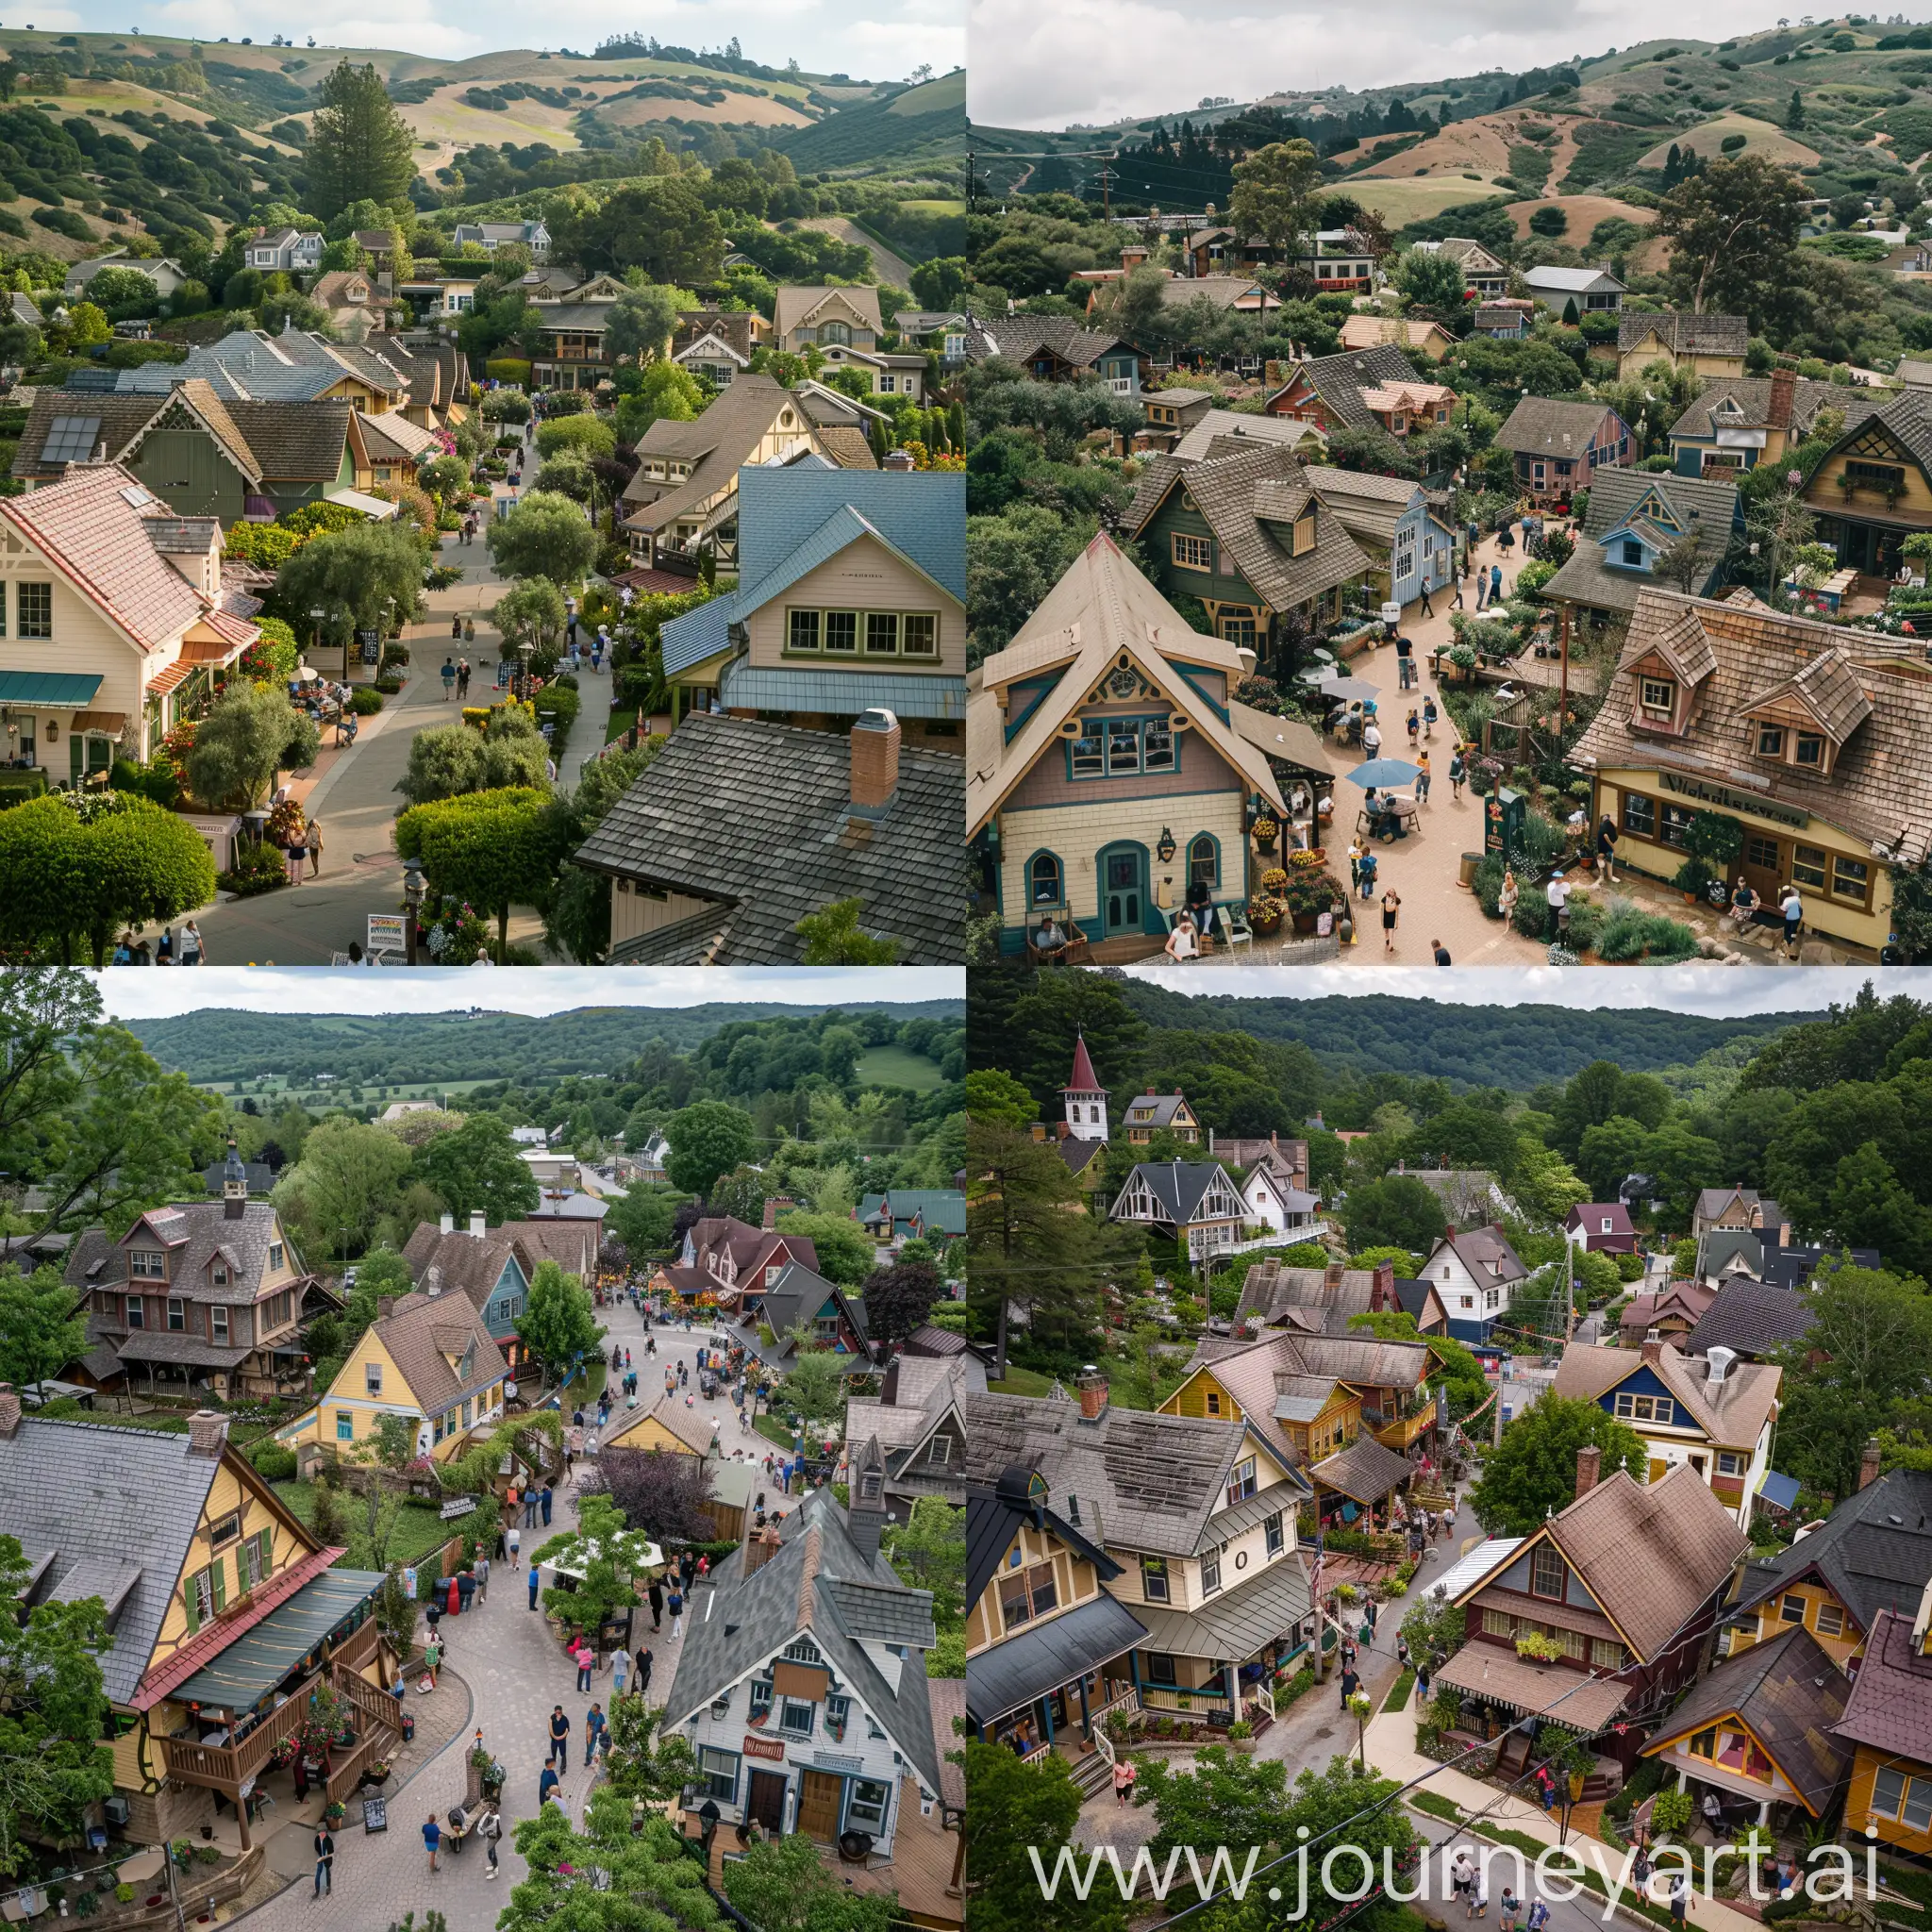 Charming-Town-of-Willowbrook-Aerial-View-of-Serene-Community-Nestled-Among-Rolling-Hills